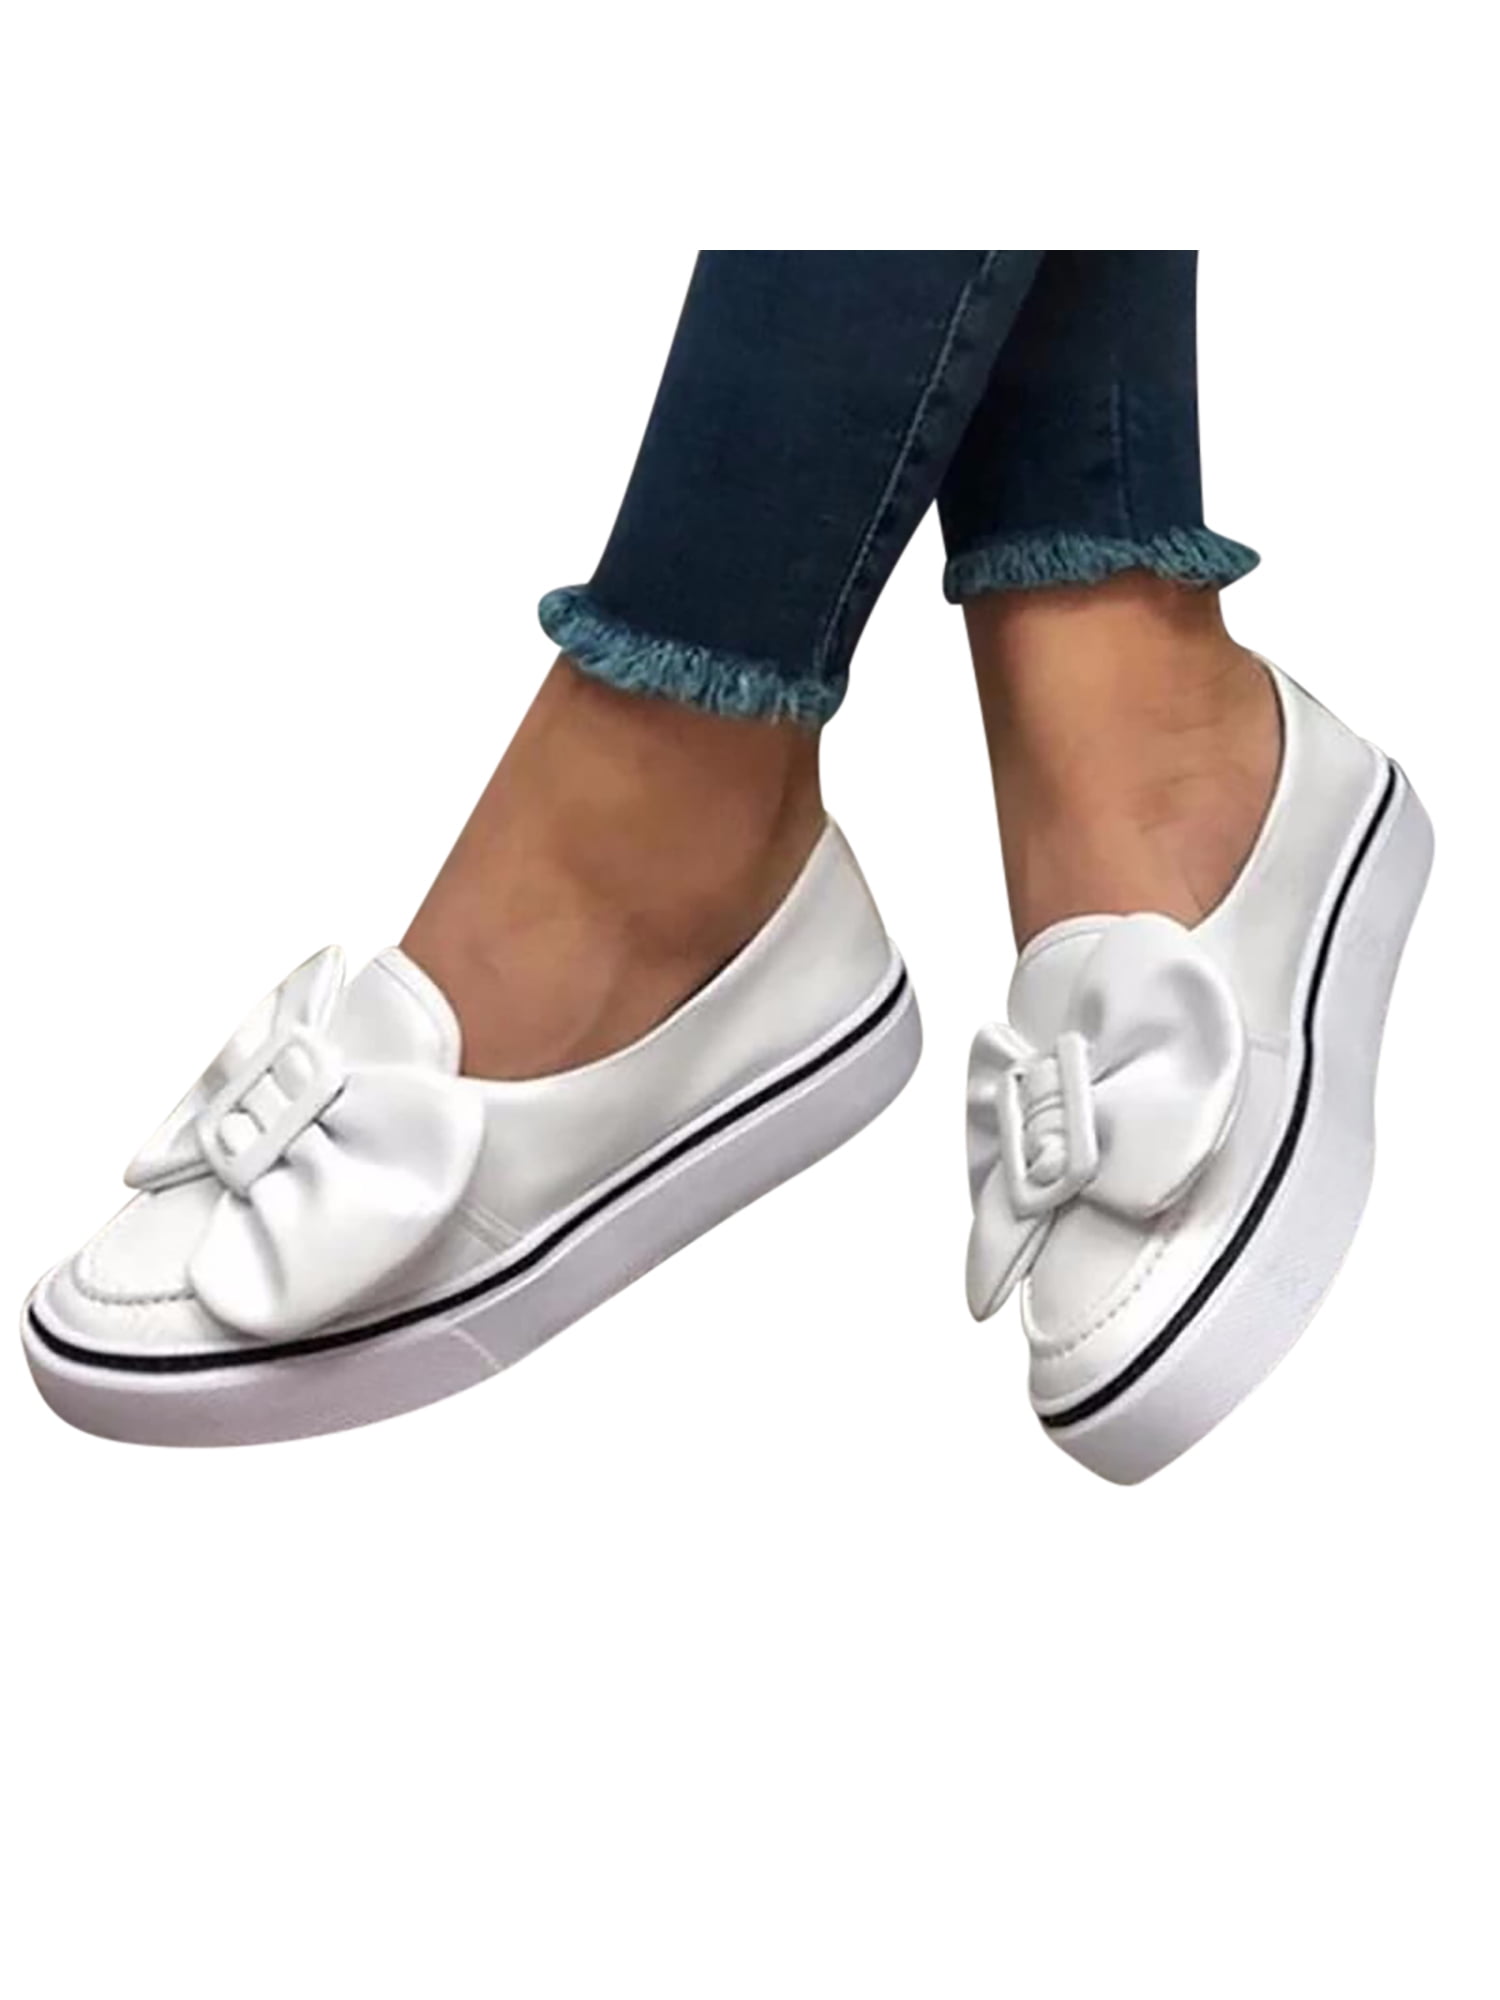 Women's Slip On Brogue Sneakers Flat Oxfords Boat Plimsolls Loafers Casual Shoes